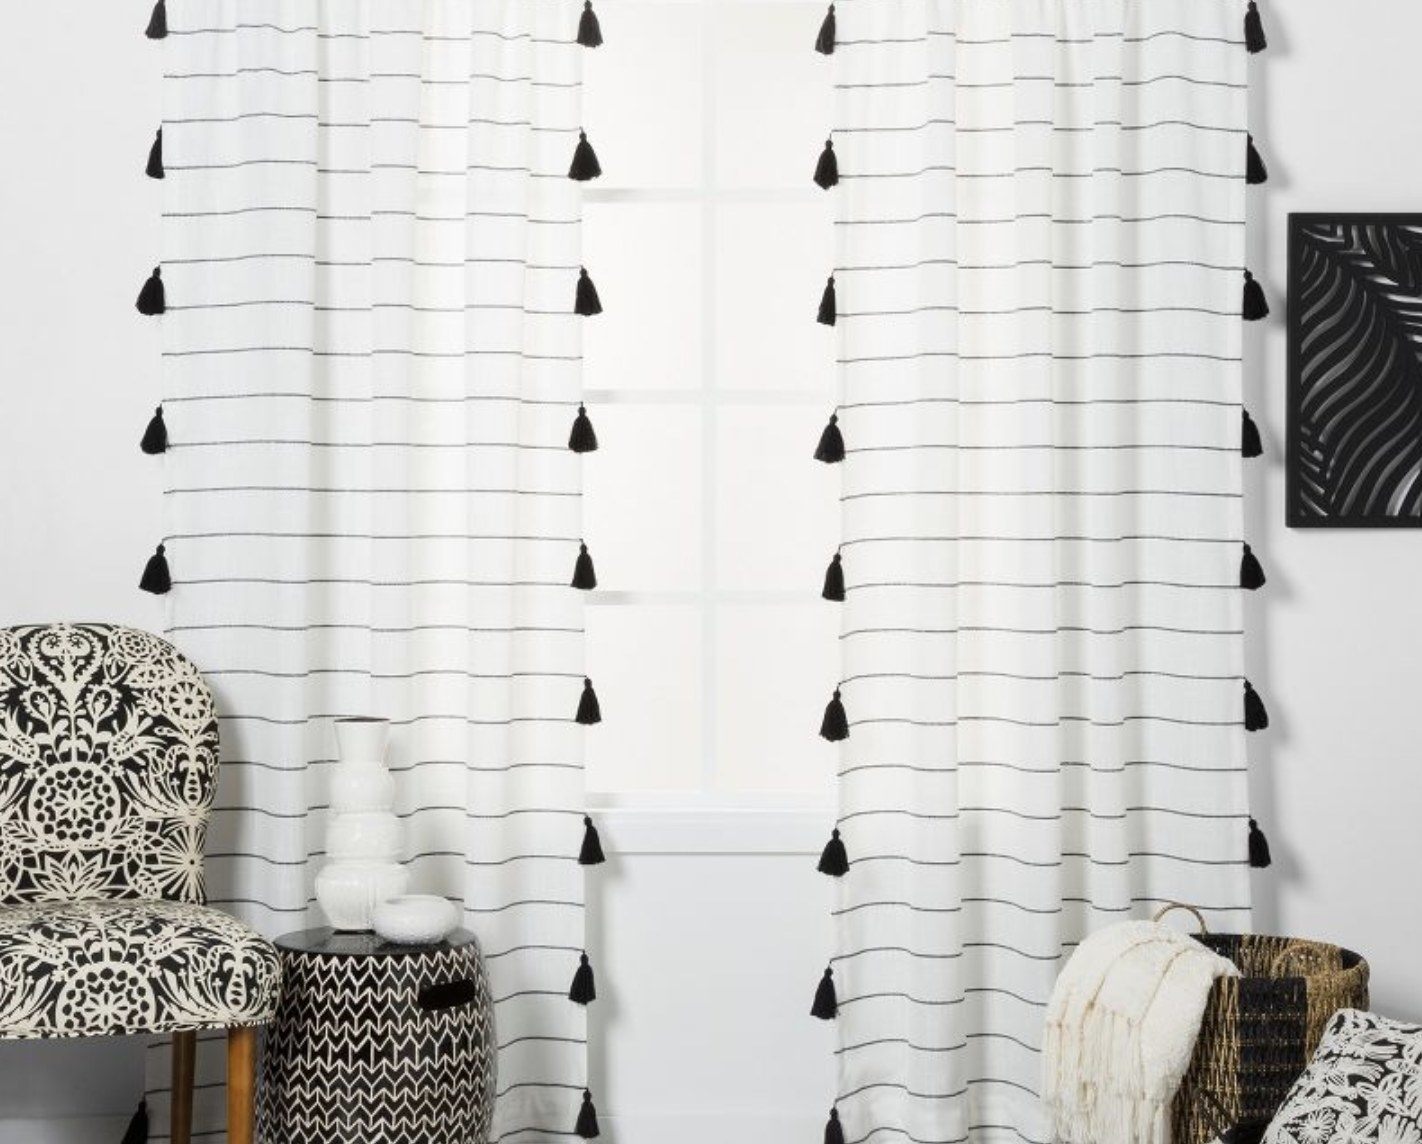 A set of black and white striped curtains